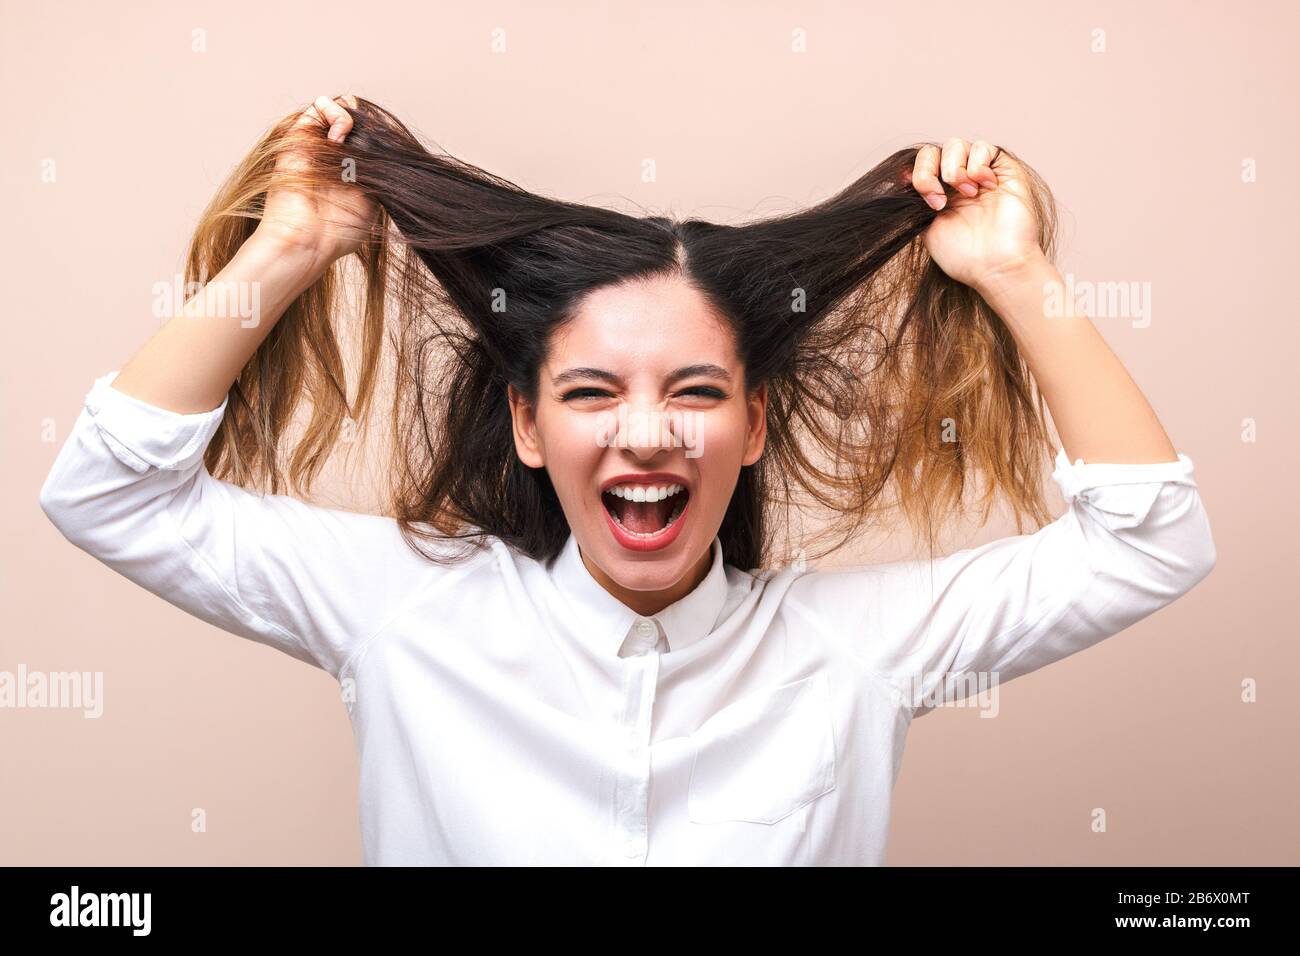 attractive brunette in white shirt pulls her hairs and screams against pink background. woman getting crazy Stock Photo